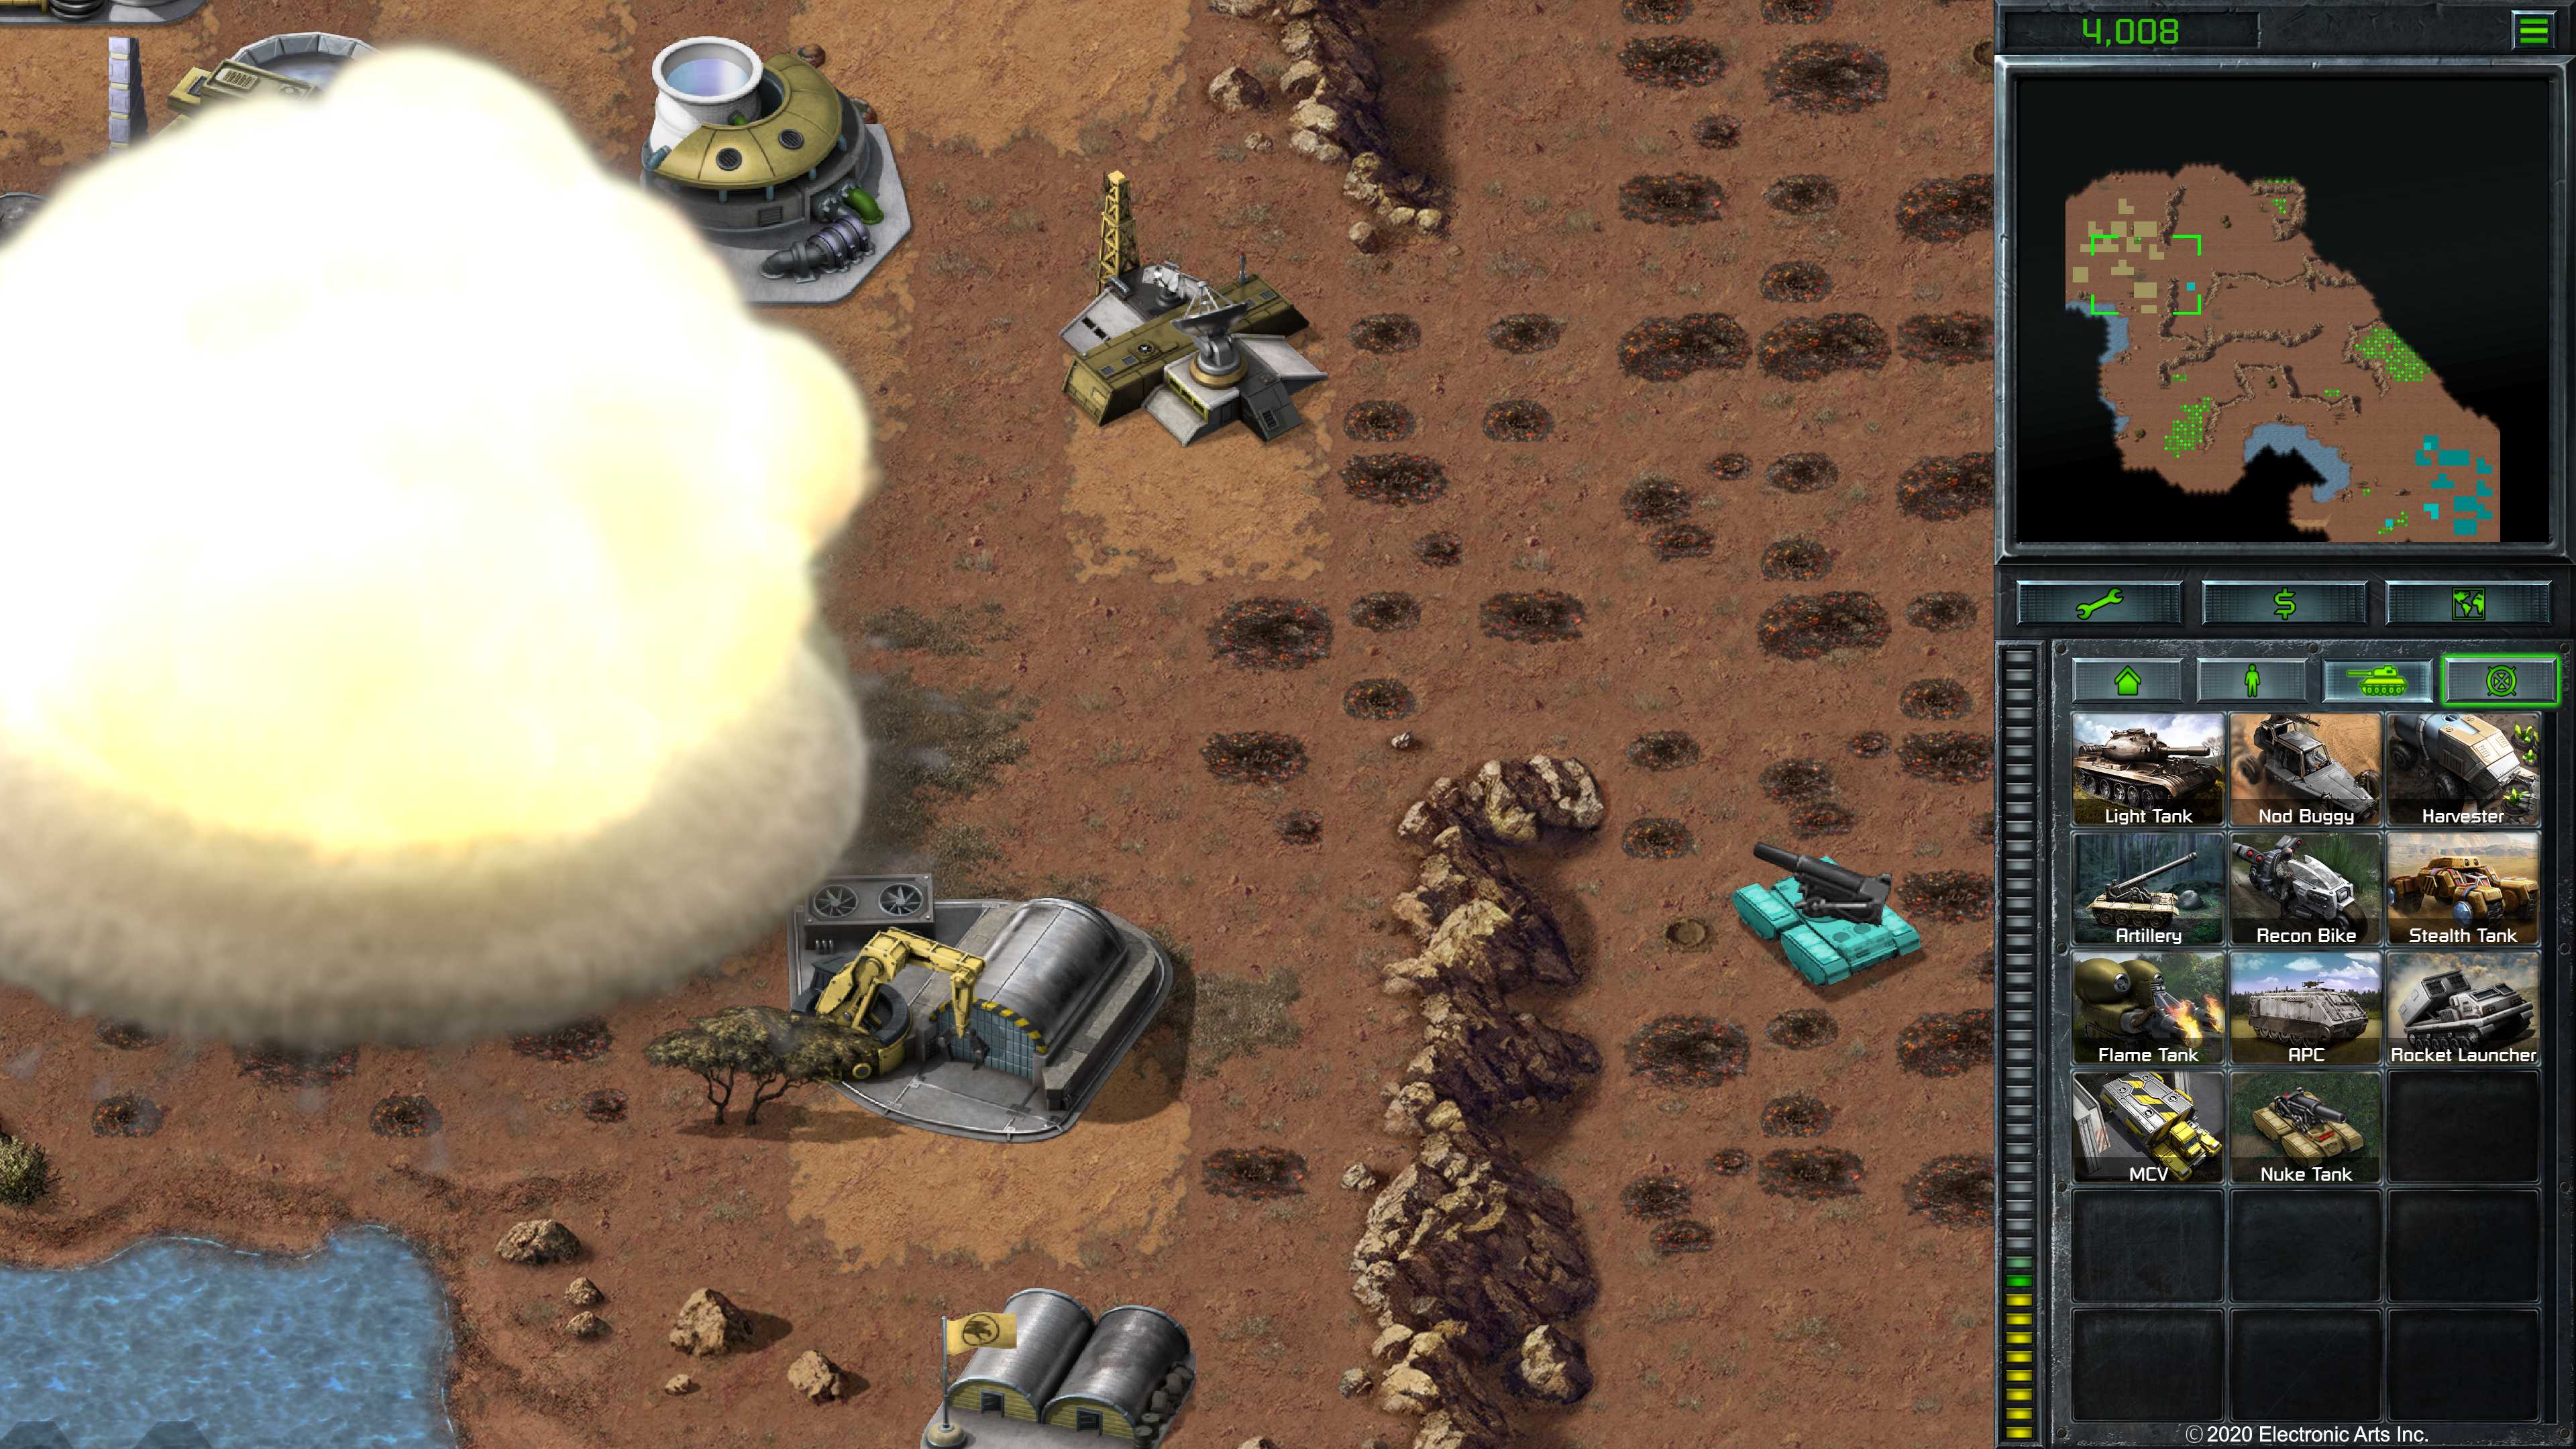 Command and conquer remastered. Command & Conquer Remastered collection. Tiberian Dawn Remastered. Command Conquer 2 Remastered collection. Command & Conquer: Tiberian Dawn.